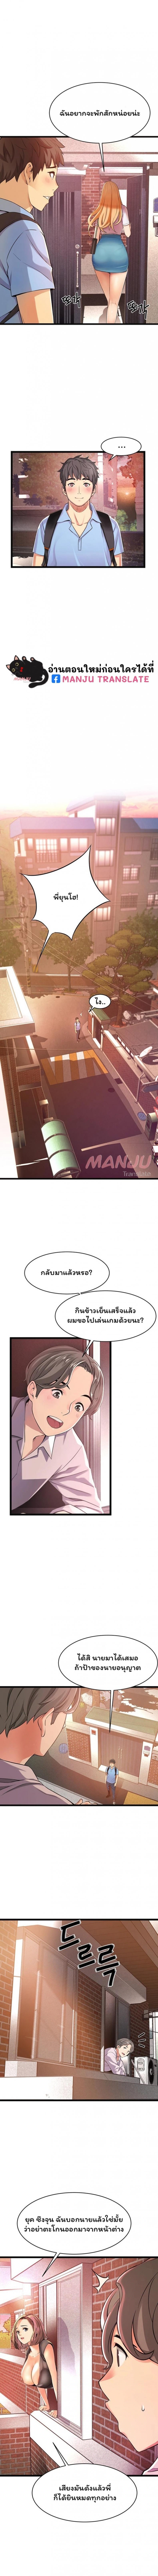 An Alley Story 1 ภาพที่ 3